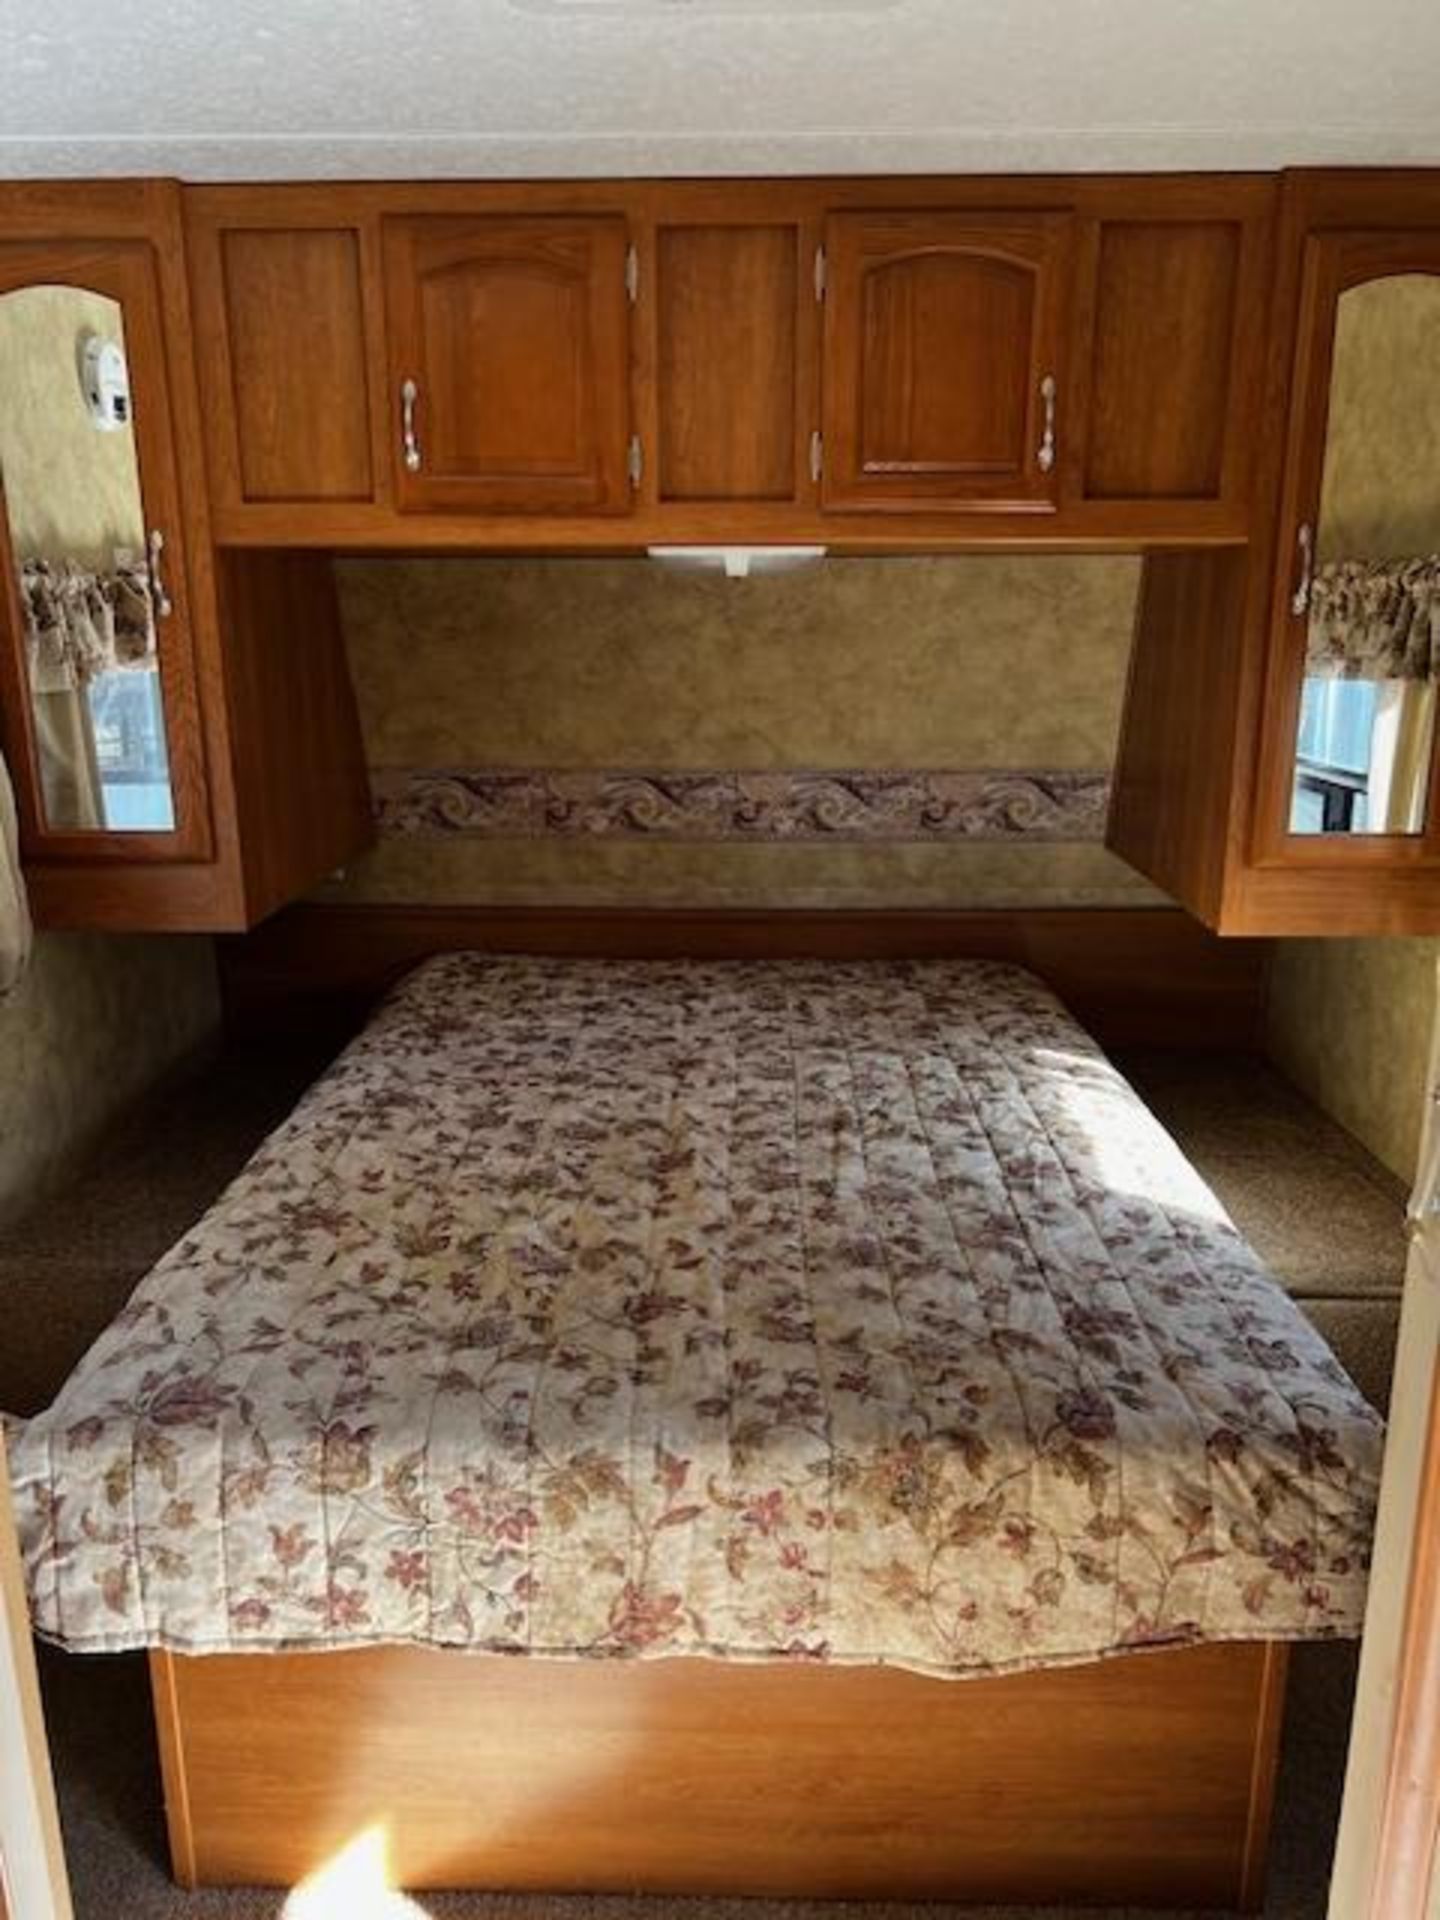 2008 COUGAR 304 VHS 30' TRAVEL TRAILER W/2 S/O, WINTERIZED, S/N: 4YDT304288C507042 - Image 7 of 20